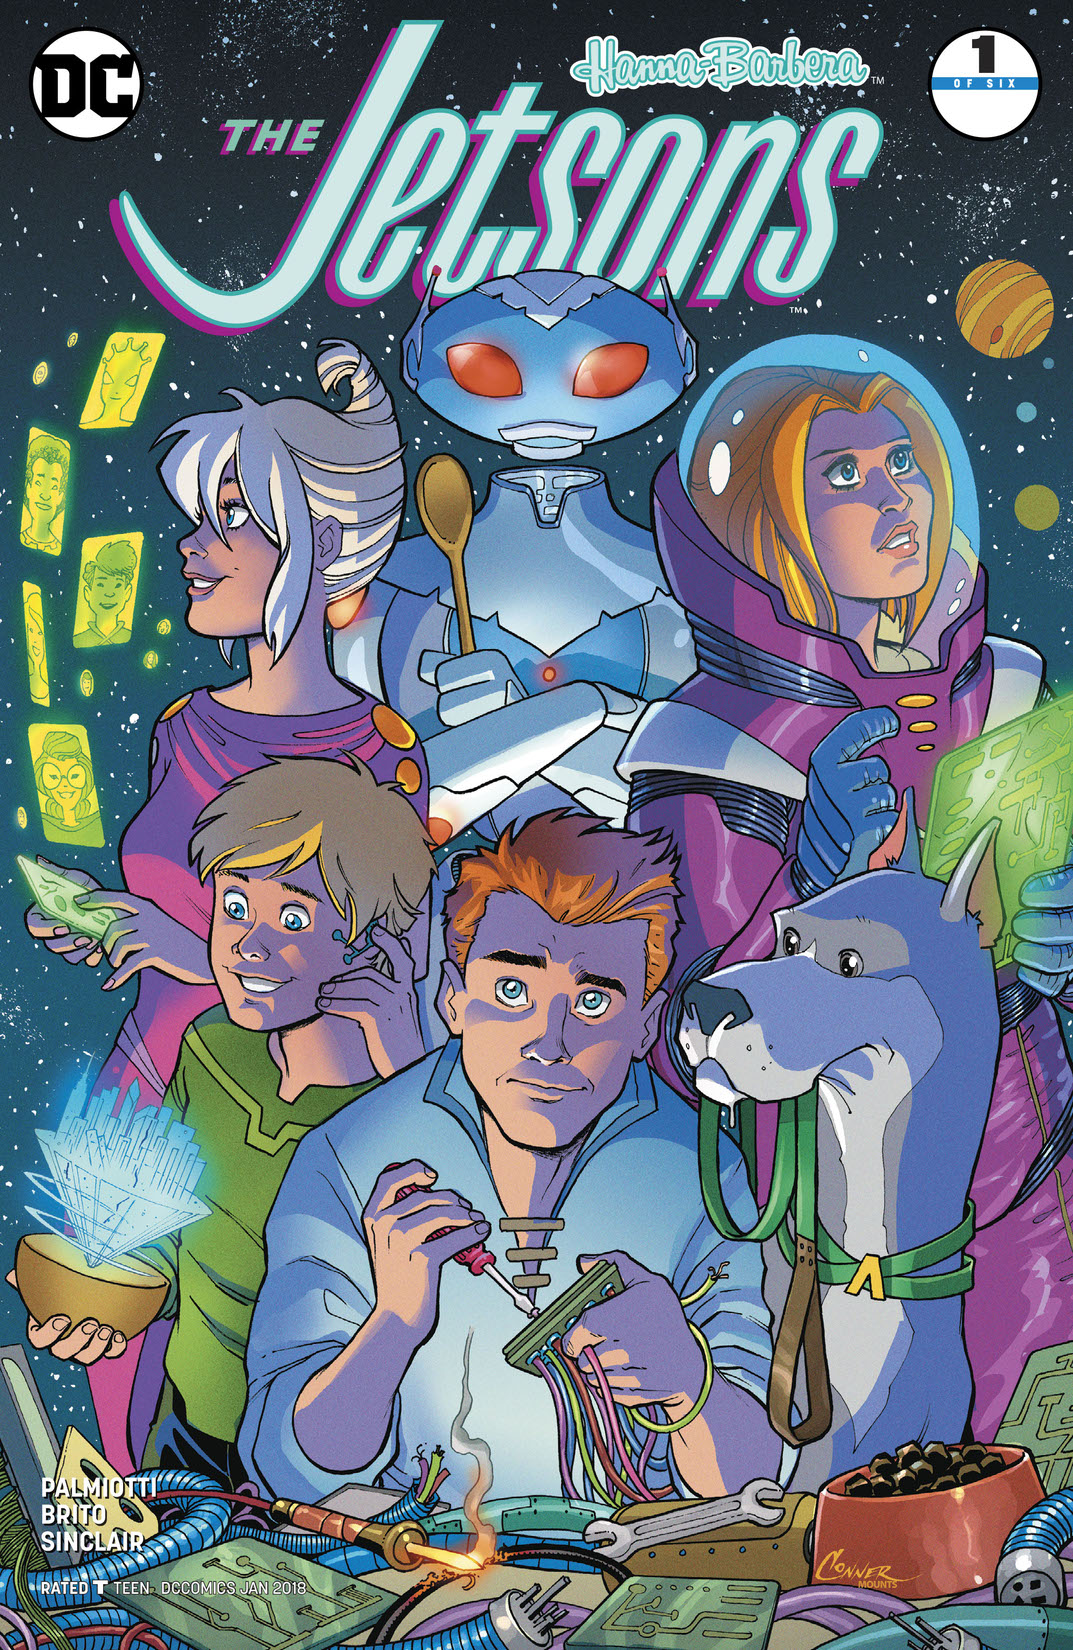 The Jetsons #1 preview images